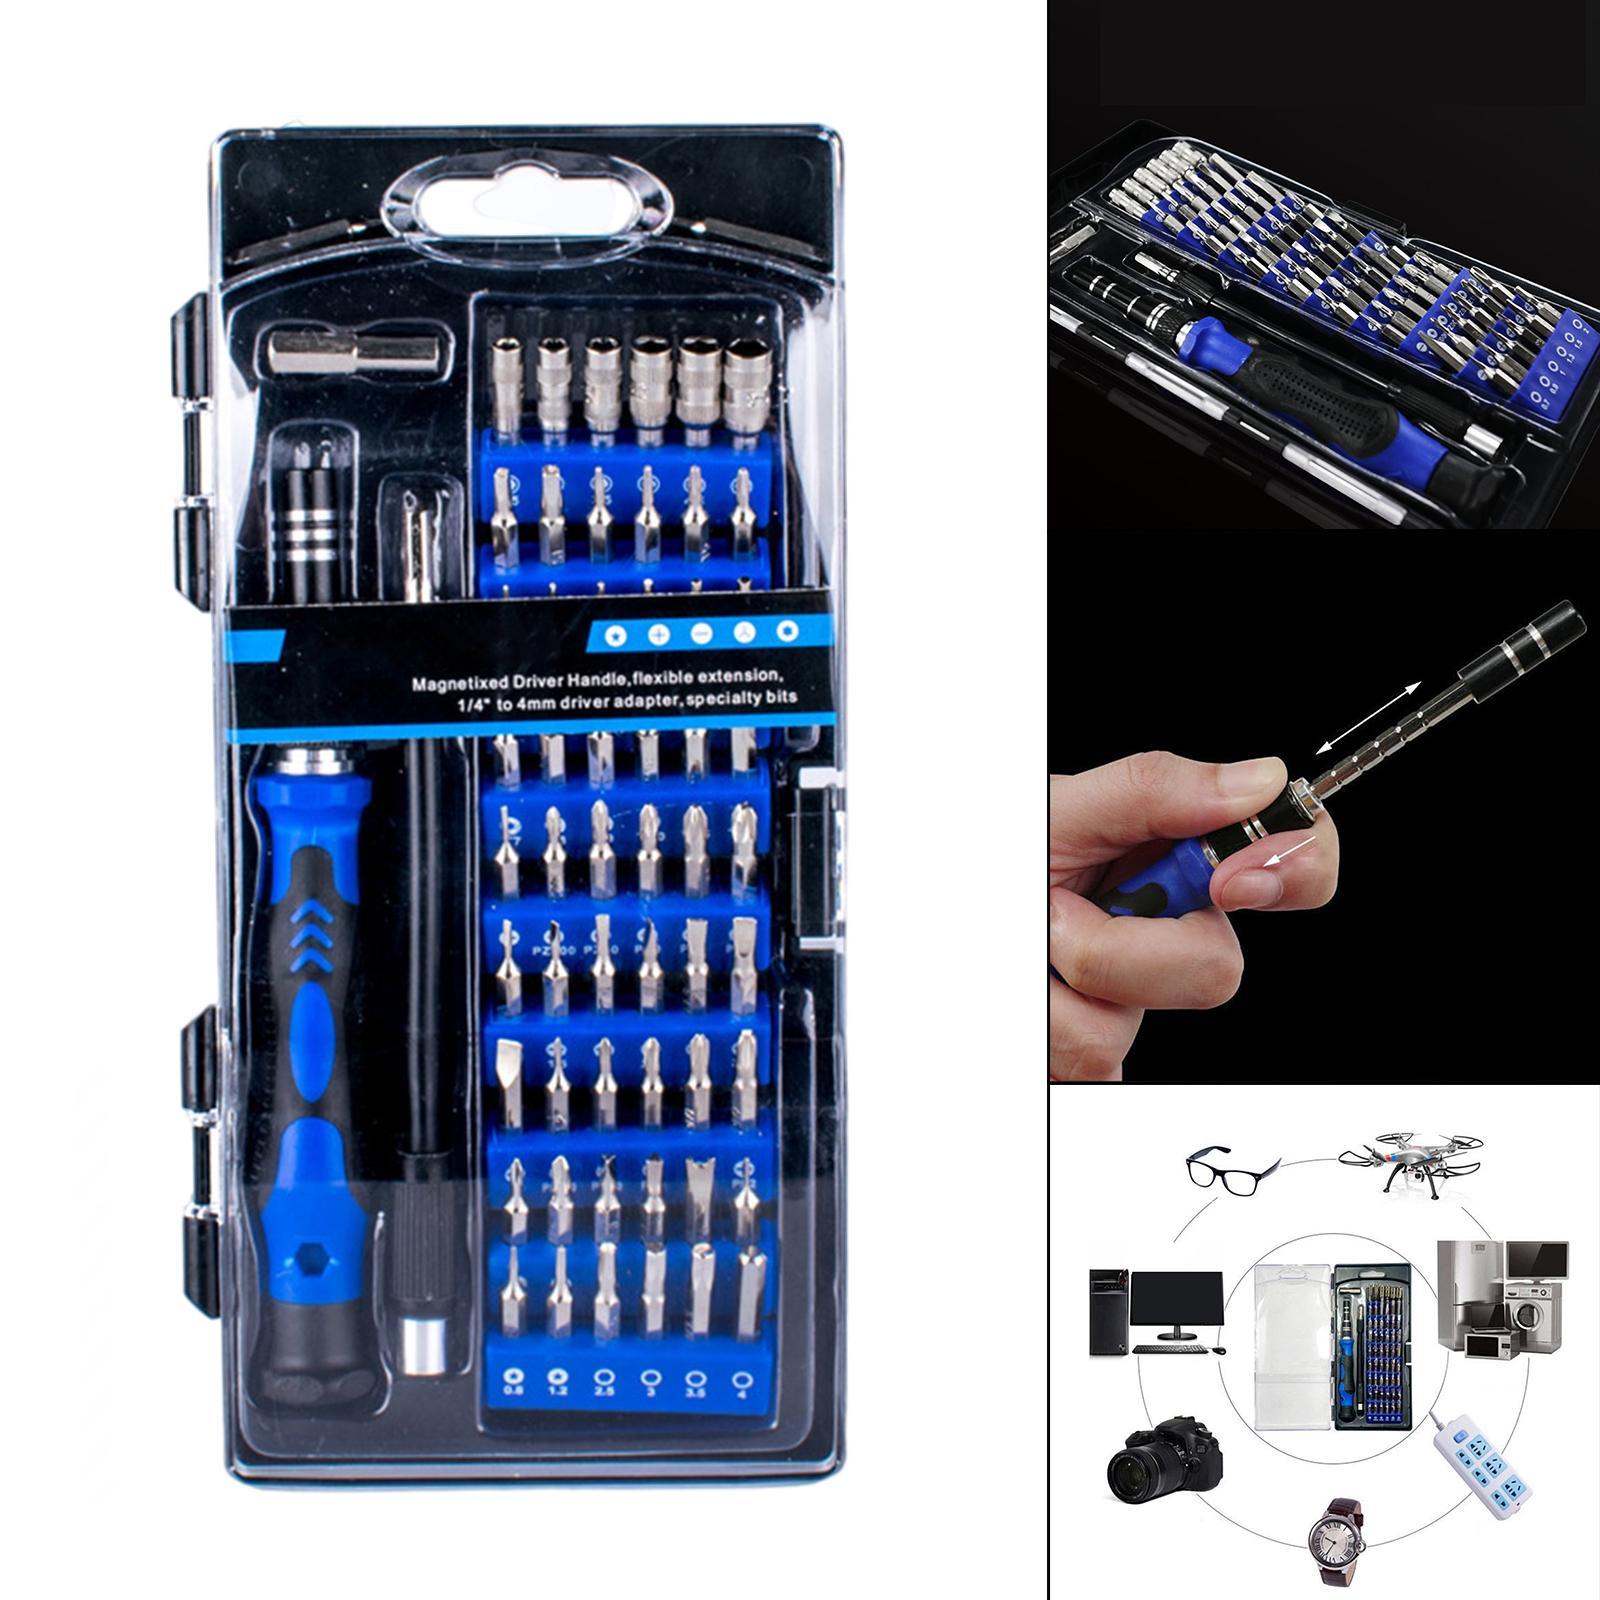 58 Pieces in 1 Precision Screwdriver Set DIY Multi-Functional for Phone